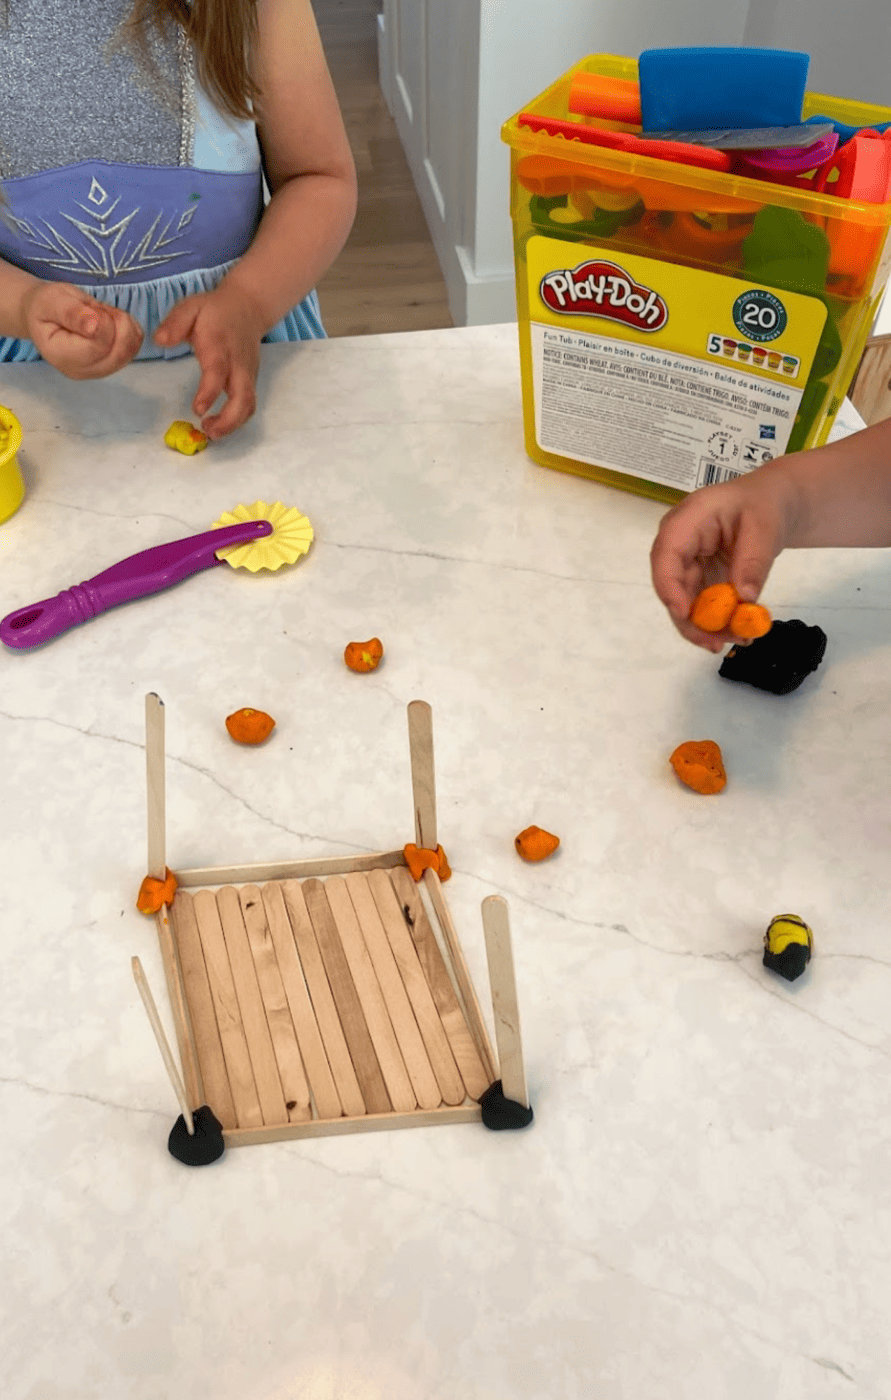 Toddler schedule building activity with playdoh and popsicle sticks.